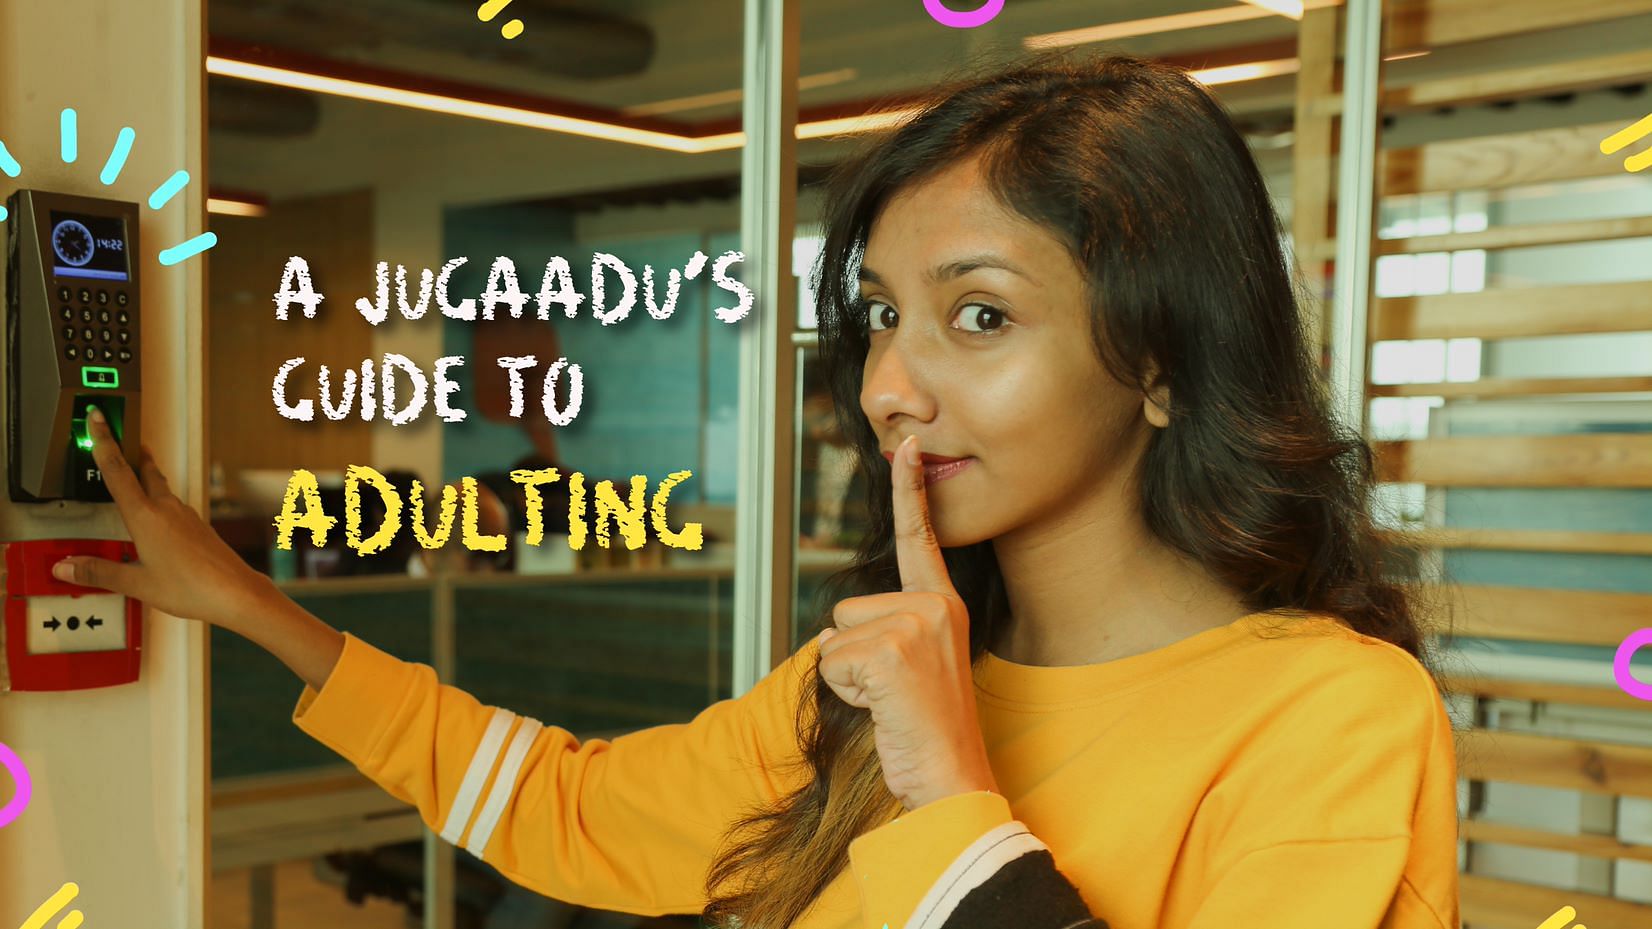 A Jugaadu’s Guide to Adulting: Keep Calm and Keep Adulting